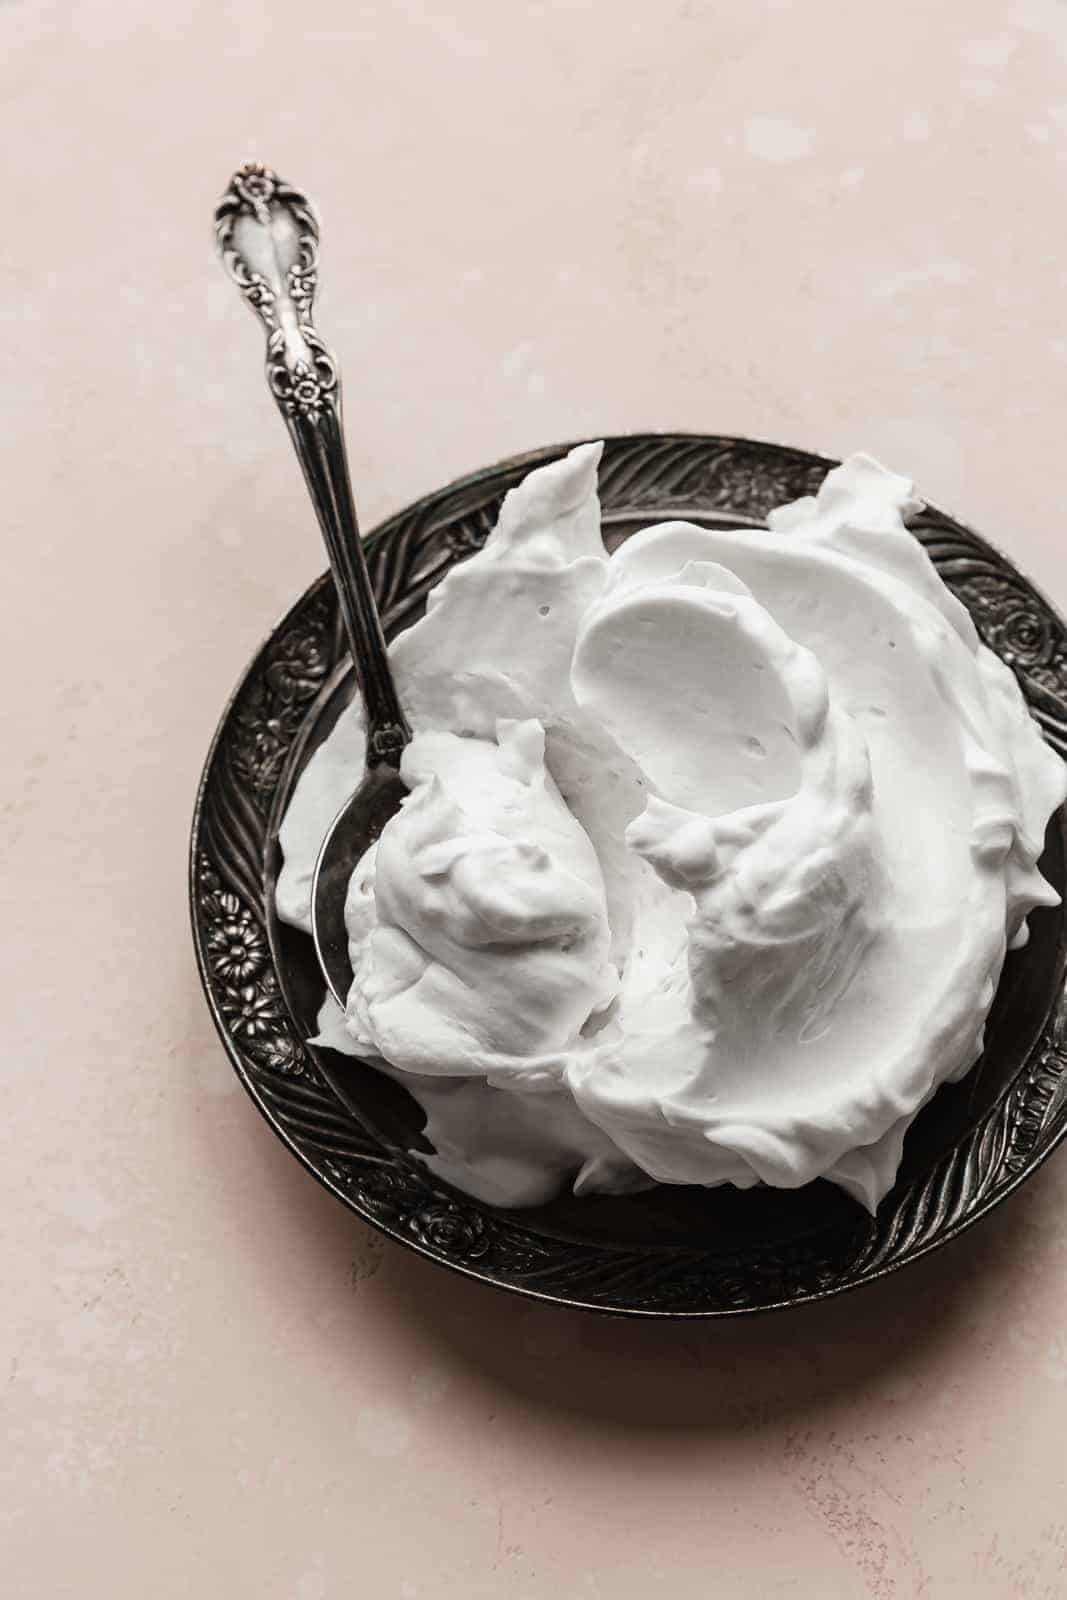 A spoon scooping up Coconut Whipped Cream.